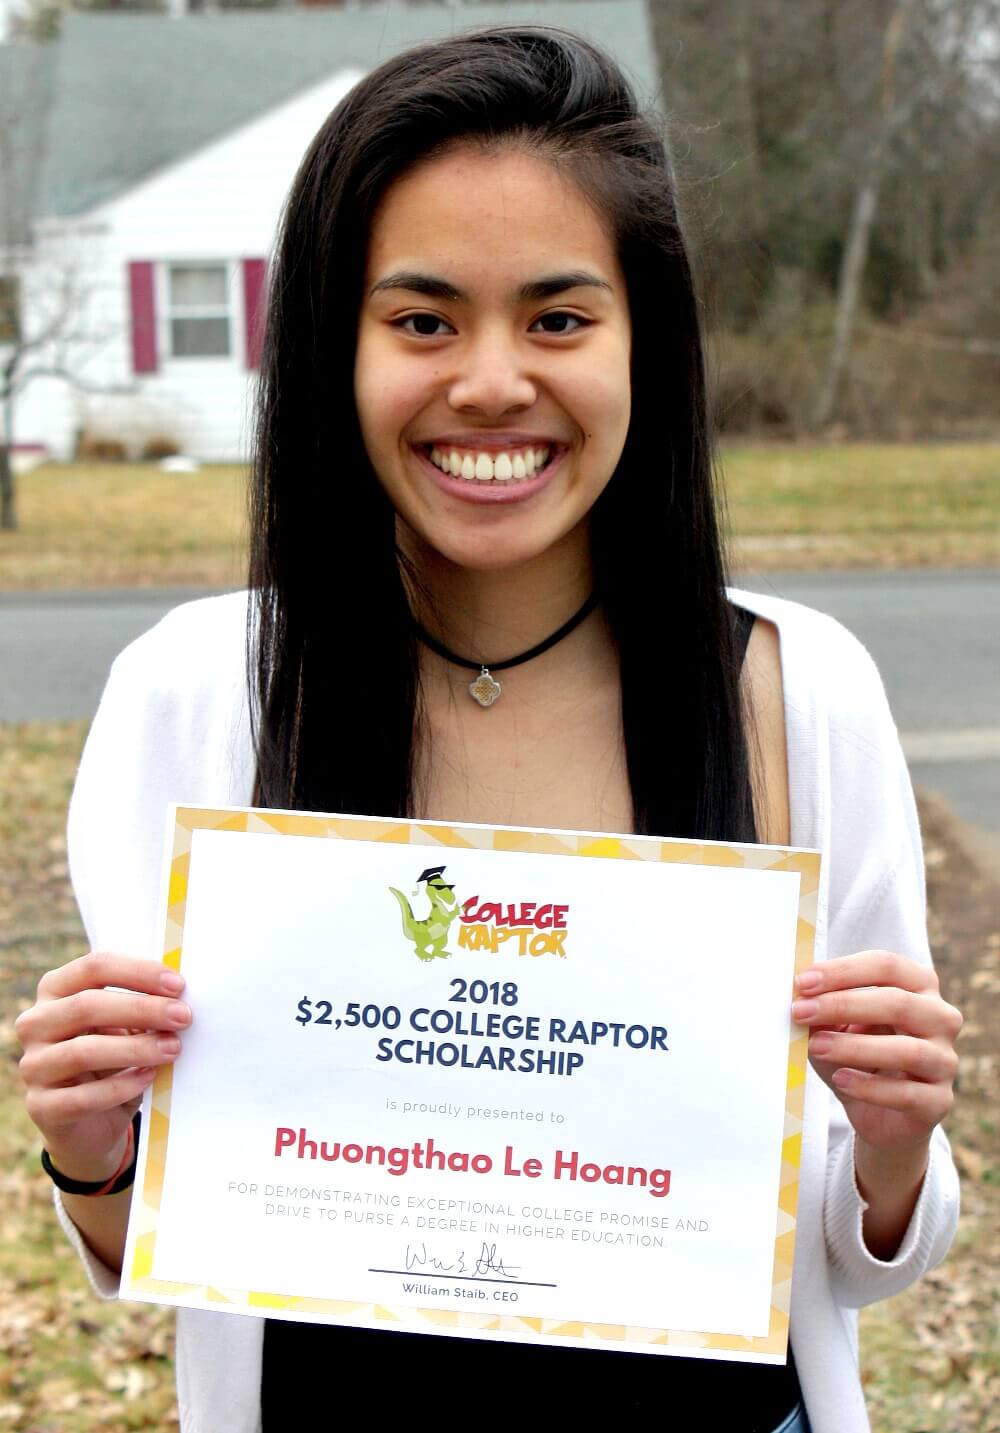 A young female student smiling while holding a $2500 College Raptor Scholarship certificate.